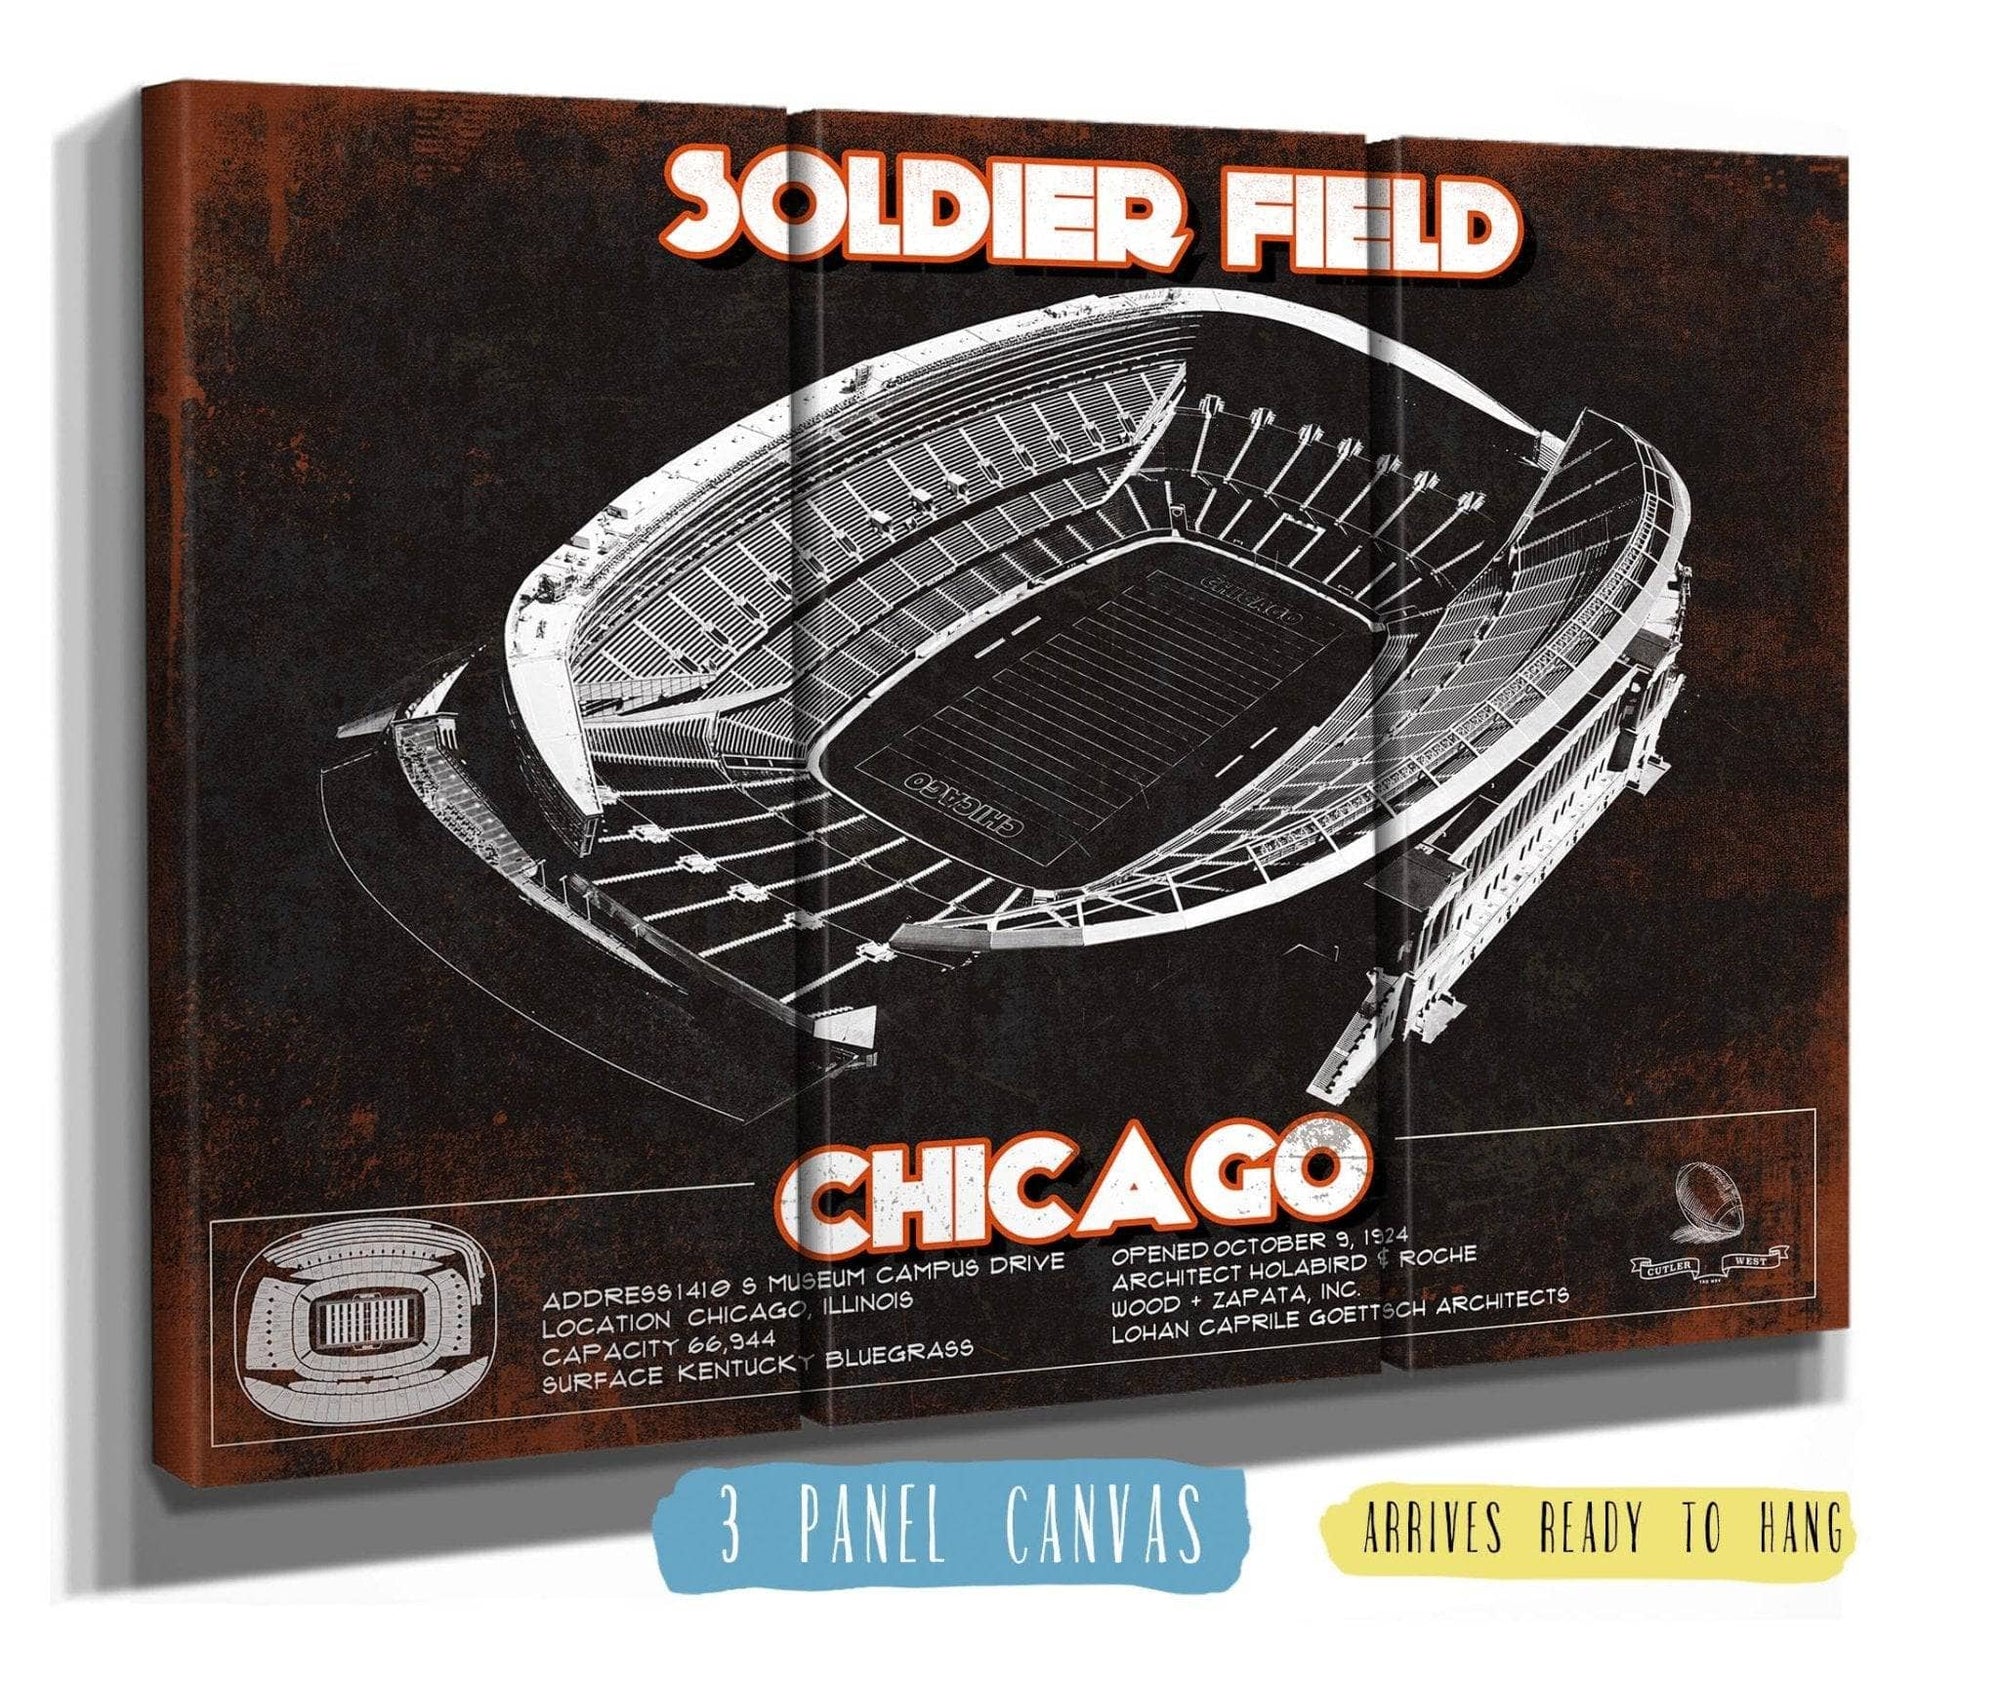 Cutler West Pro Football Collection 48" x 32" / 3 Panel Canvas Wrap Chicago Bears Stadium Seating Chart Soldier Field Vintage Football Print 933350144_31958